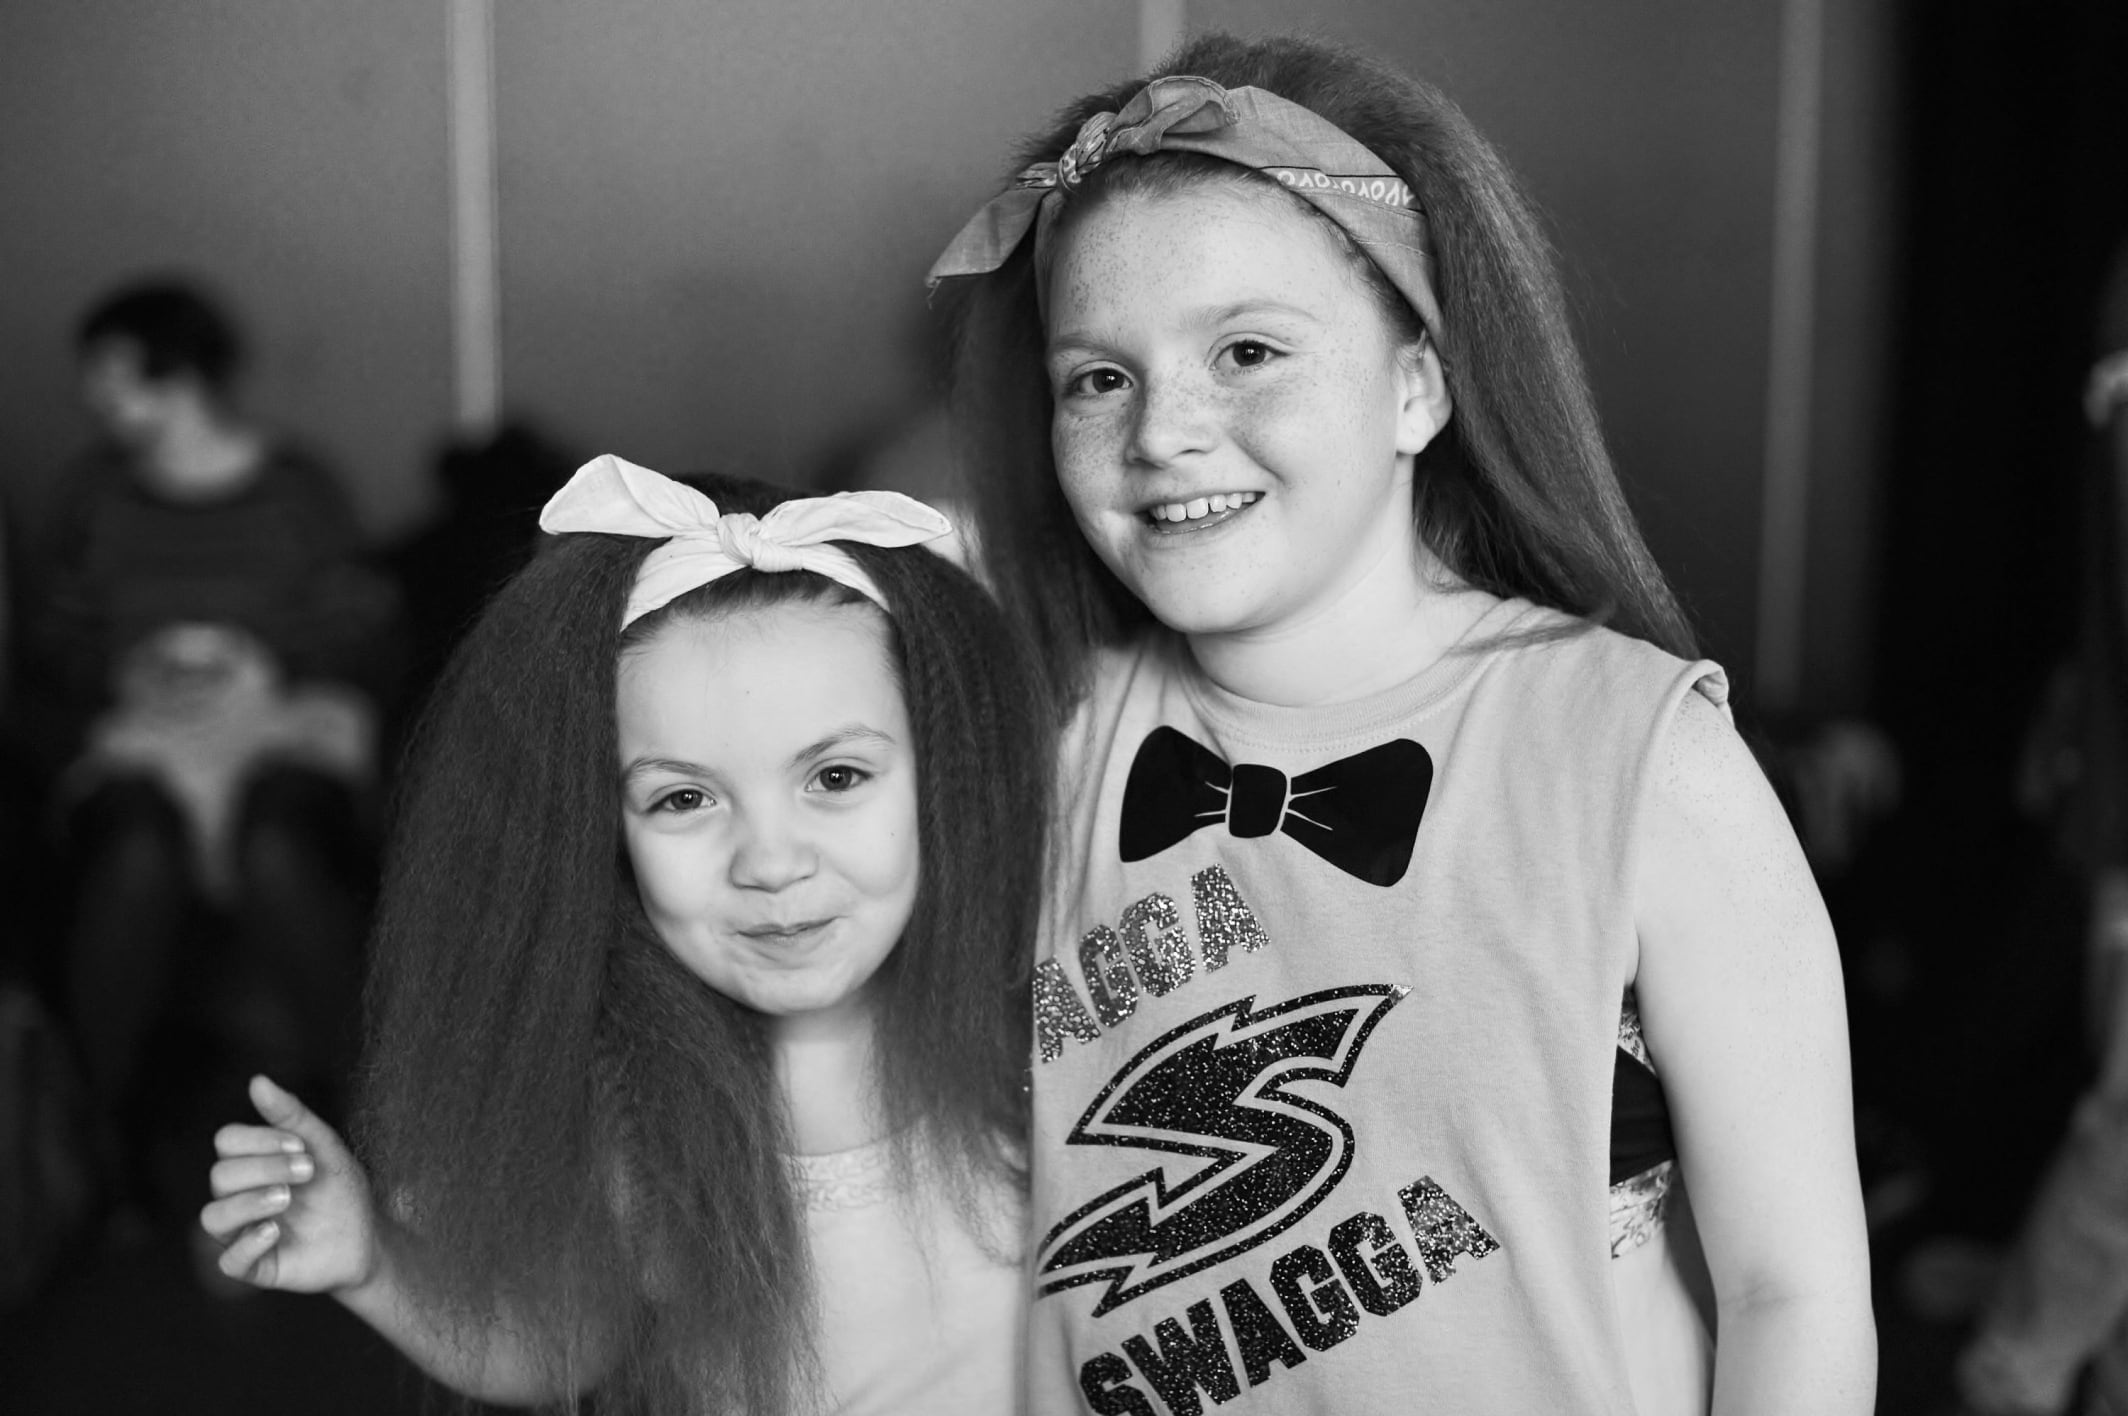 Two girls in black and white, smiling at the camera